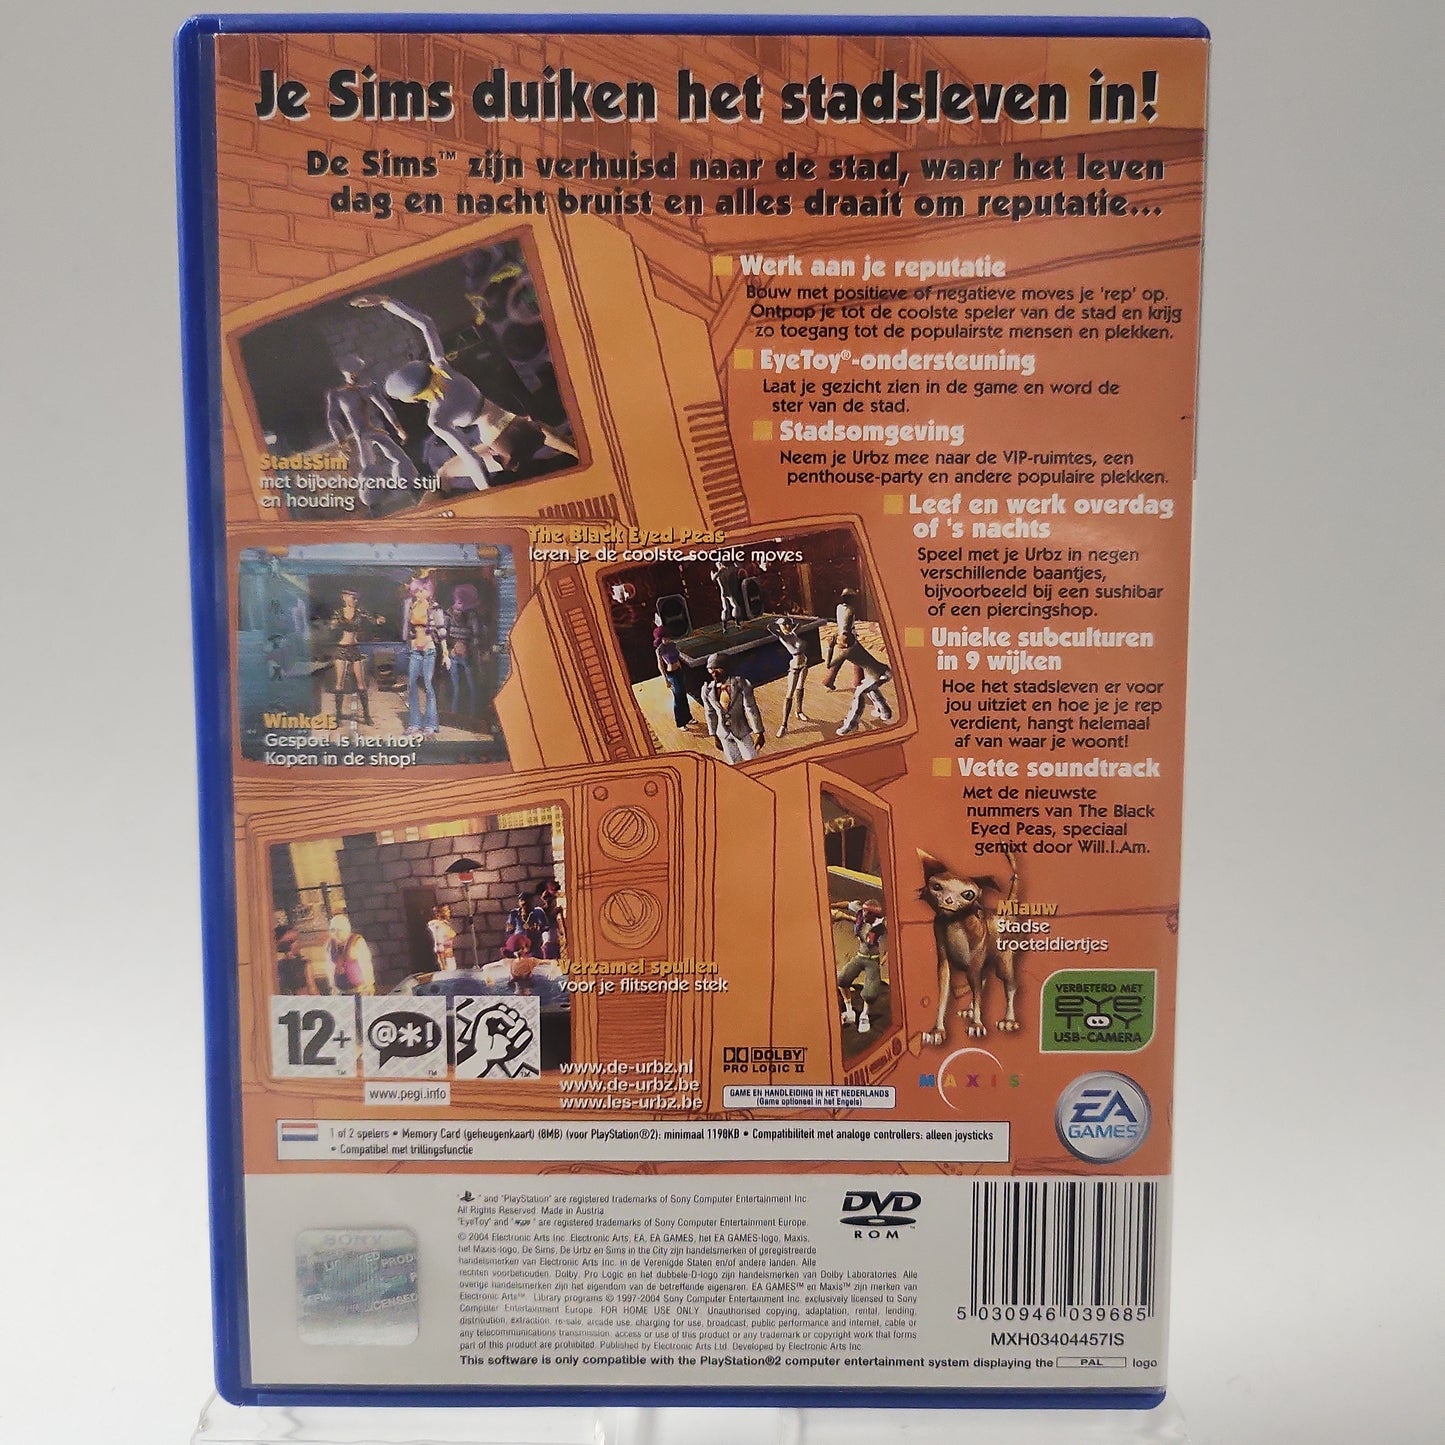 De Urbz: Sims in the City Playstation 2